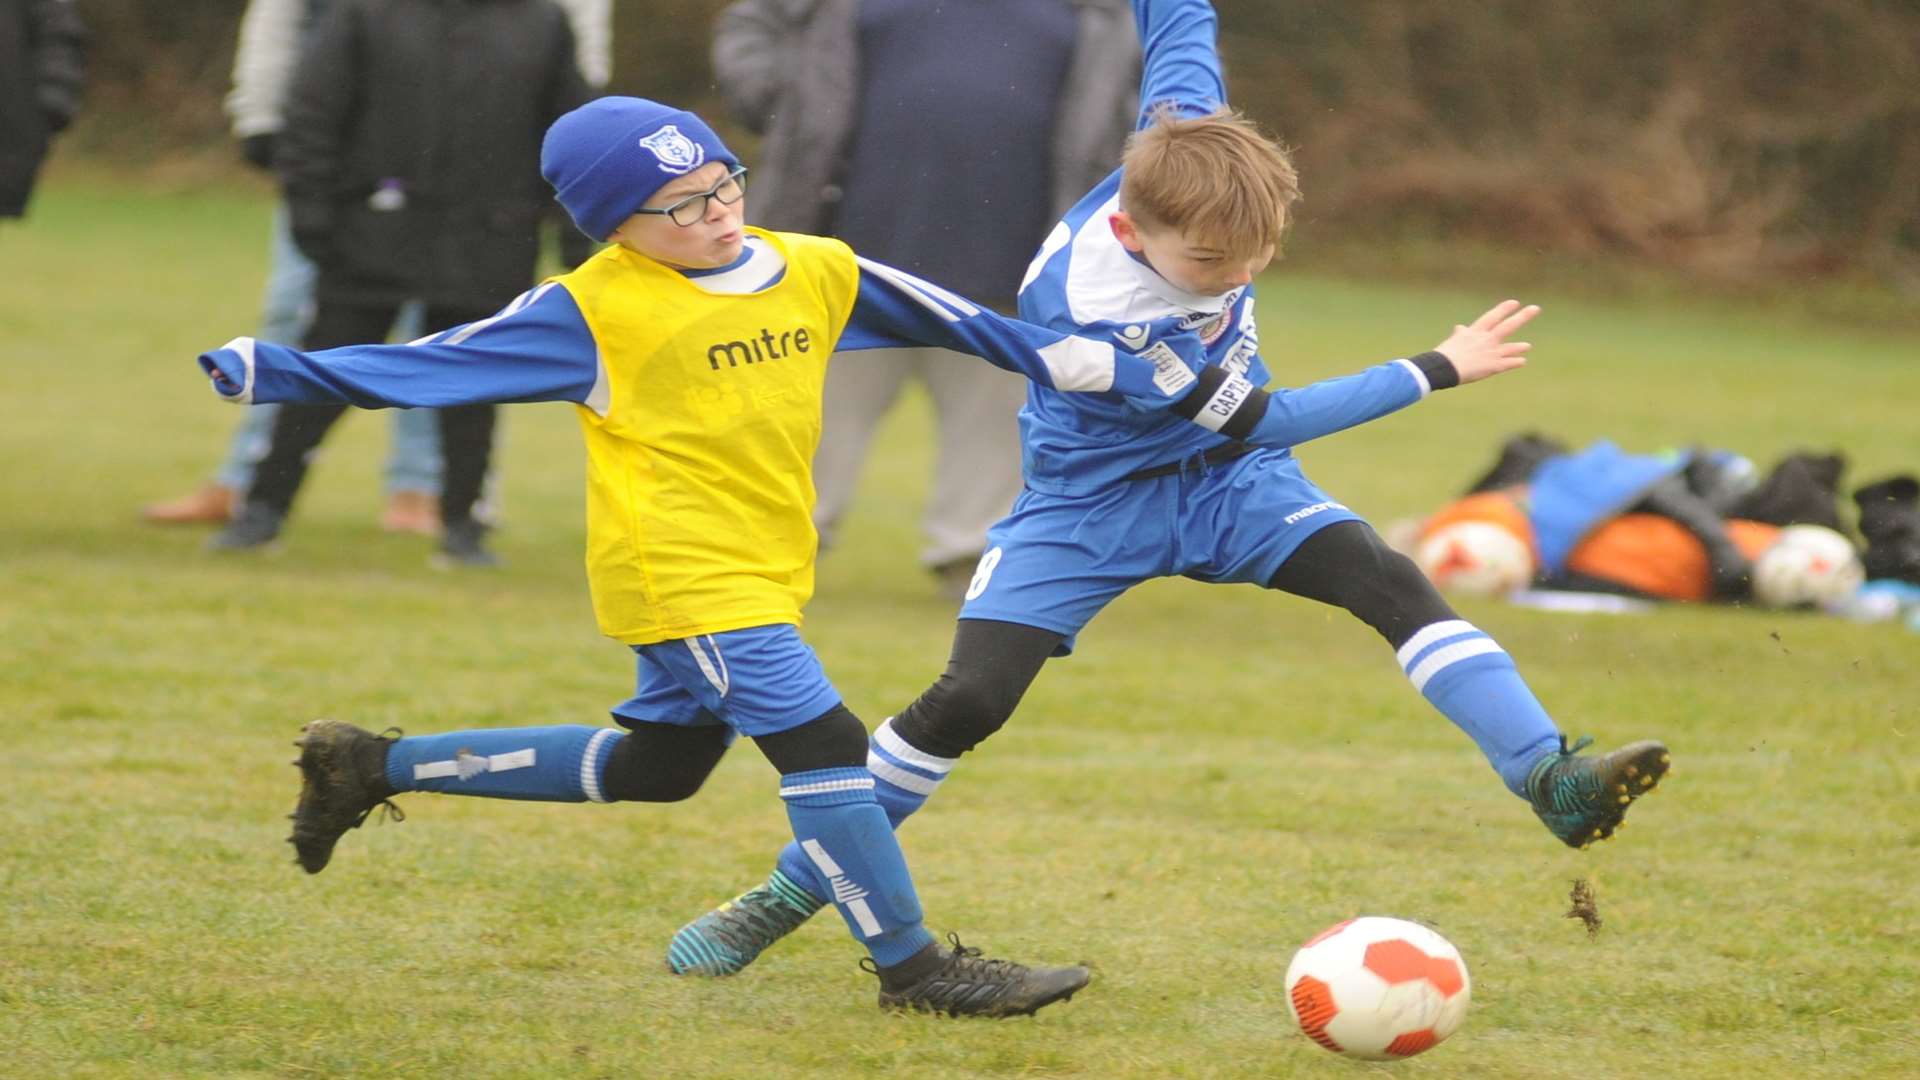 KFU Woodpecker and New Road under-9s battle it out Picture: Steve Crispe